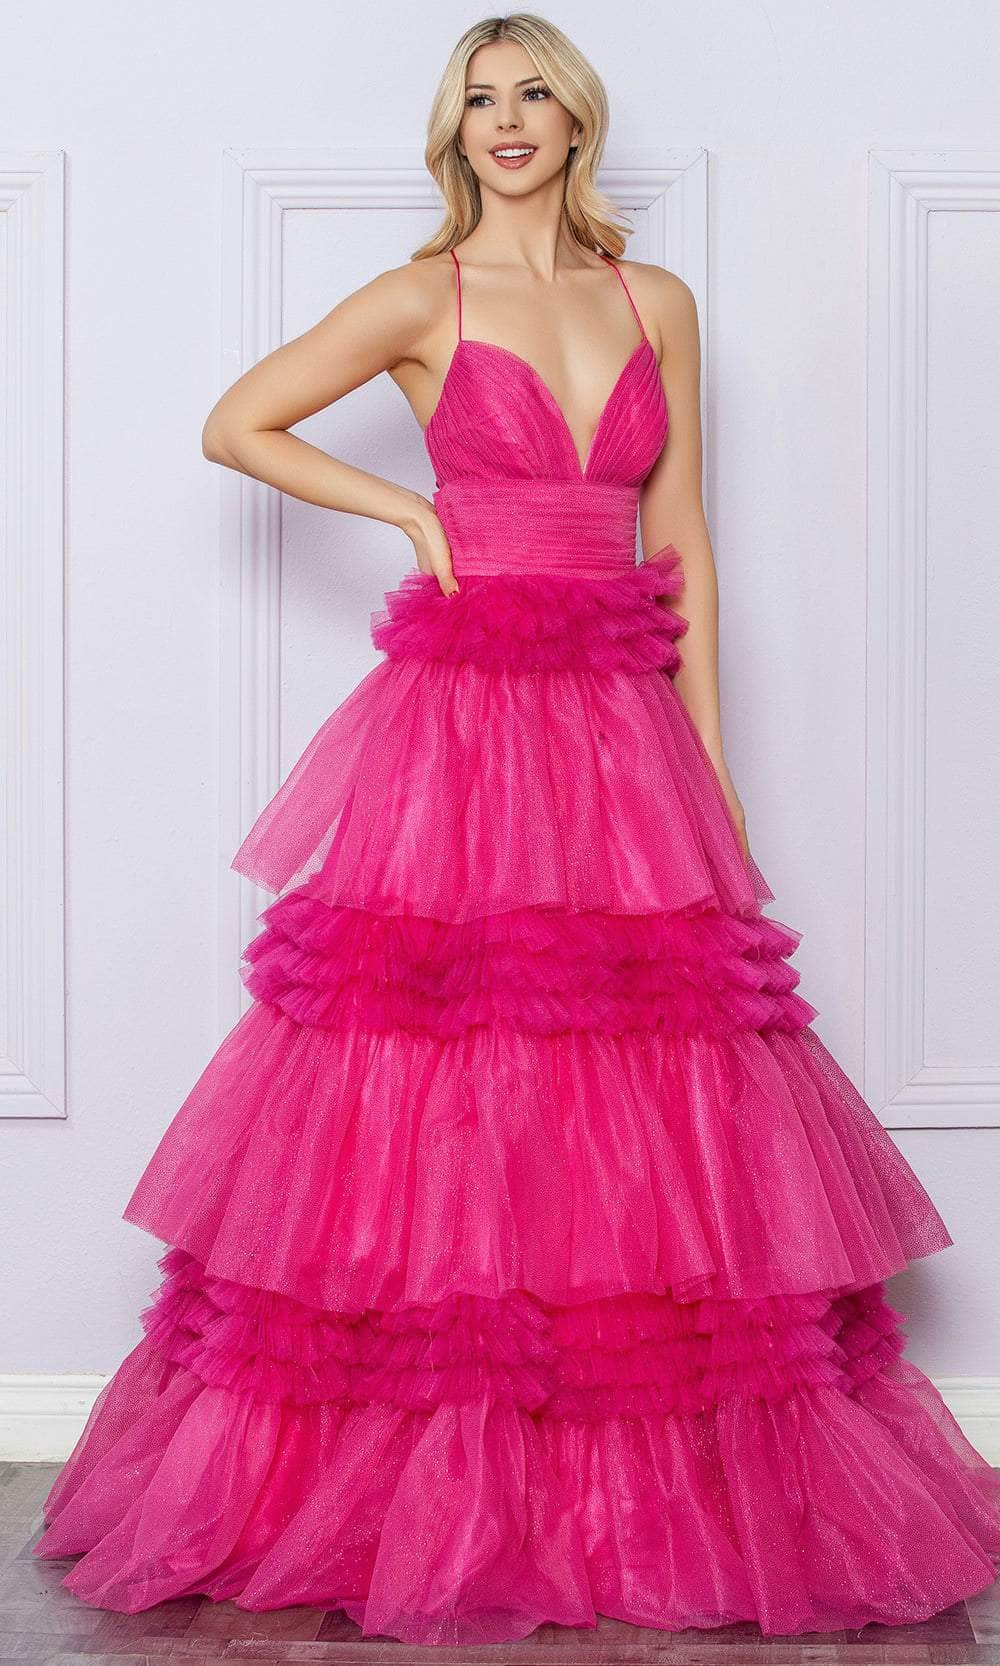 Nox Anabel R1316 - Deep V-Neck Tiered Prom Dress Special Occasion Dress 0 / Fuchsia